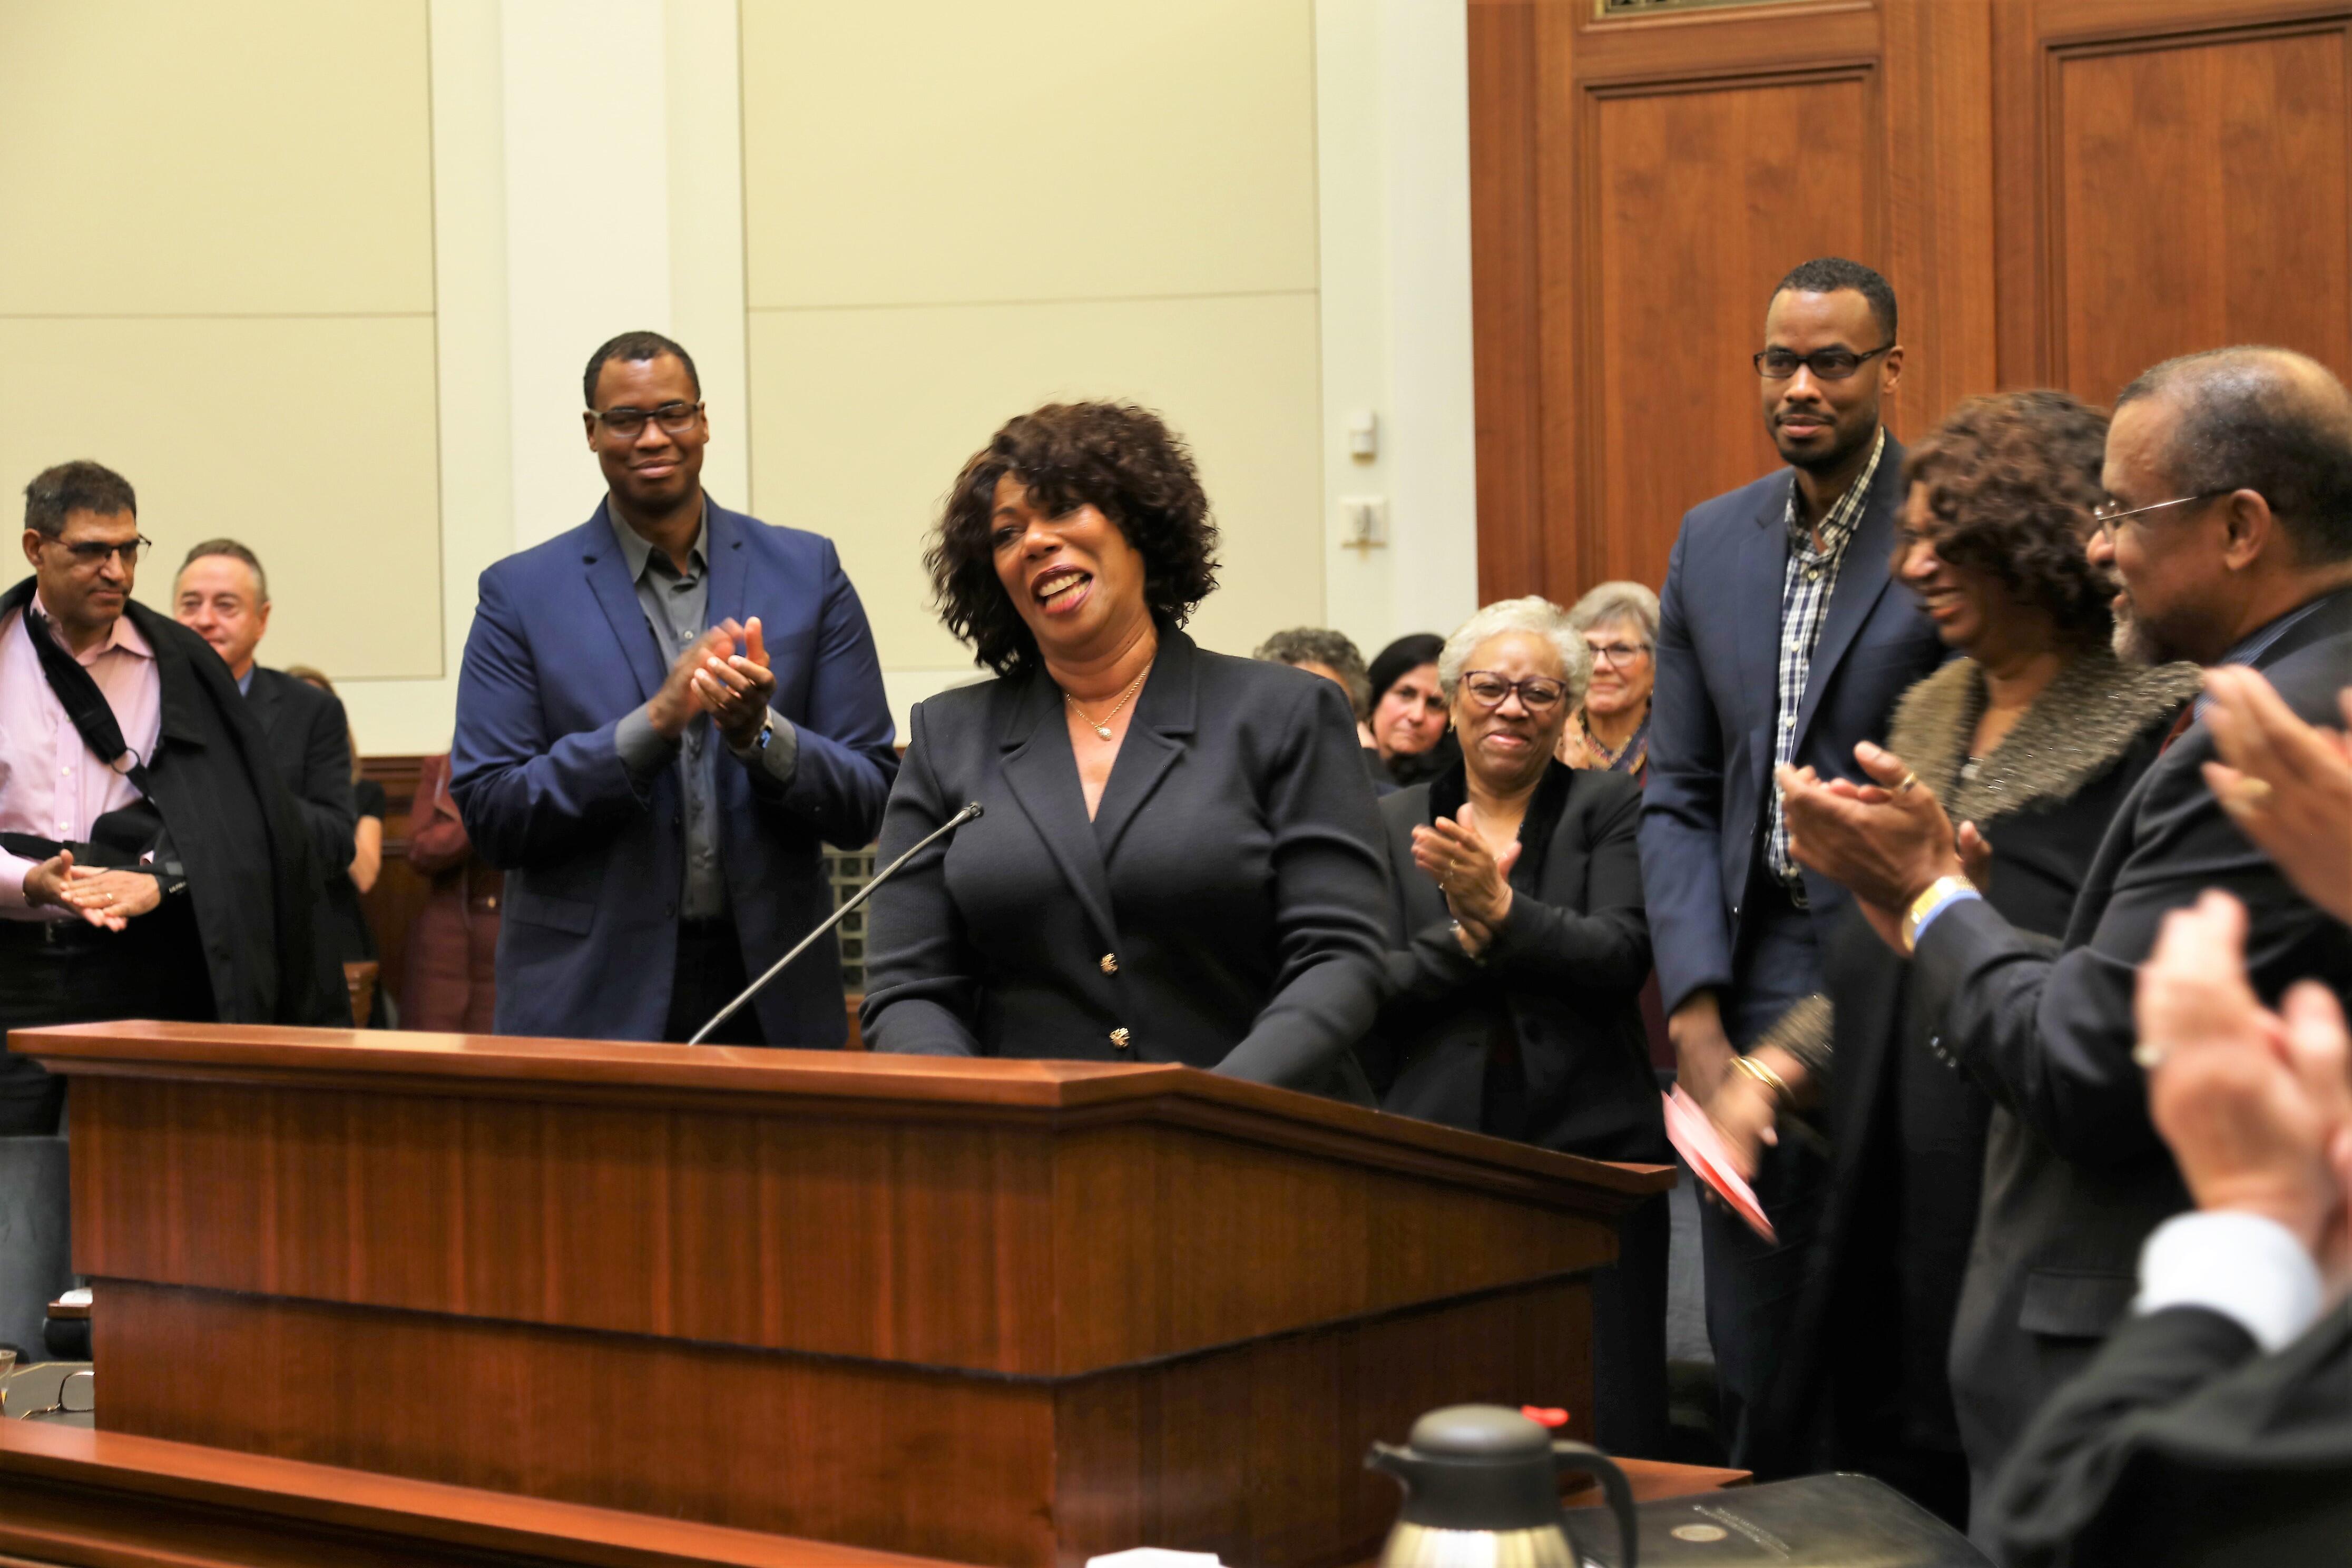 Governor Newsom last year appointed Teri L. Jackson to the First District Court of Appeal, that court&#39;s first African-American female justice.